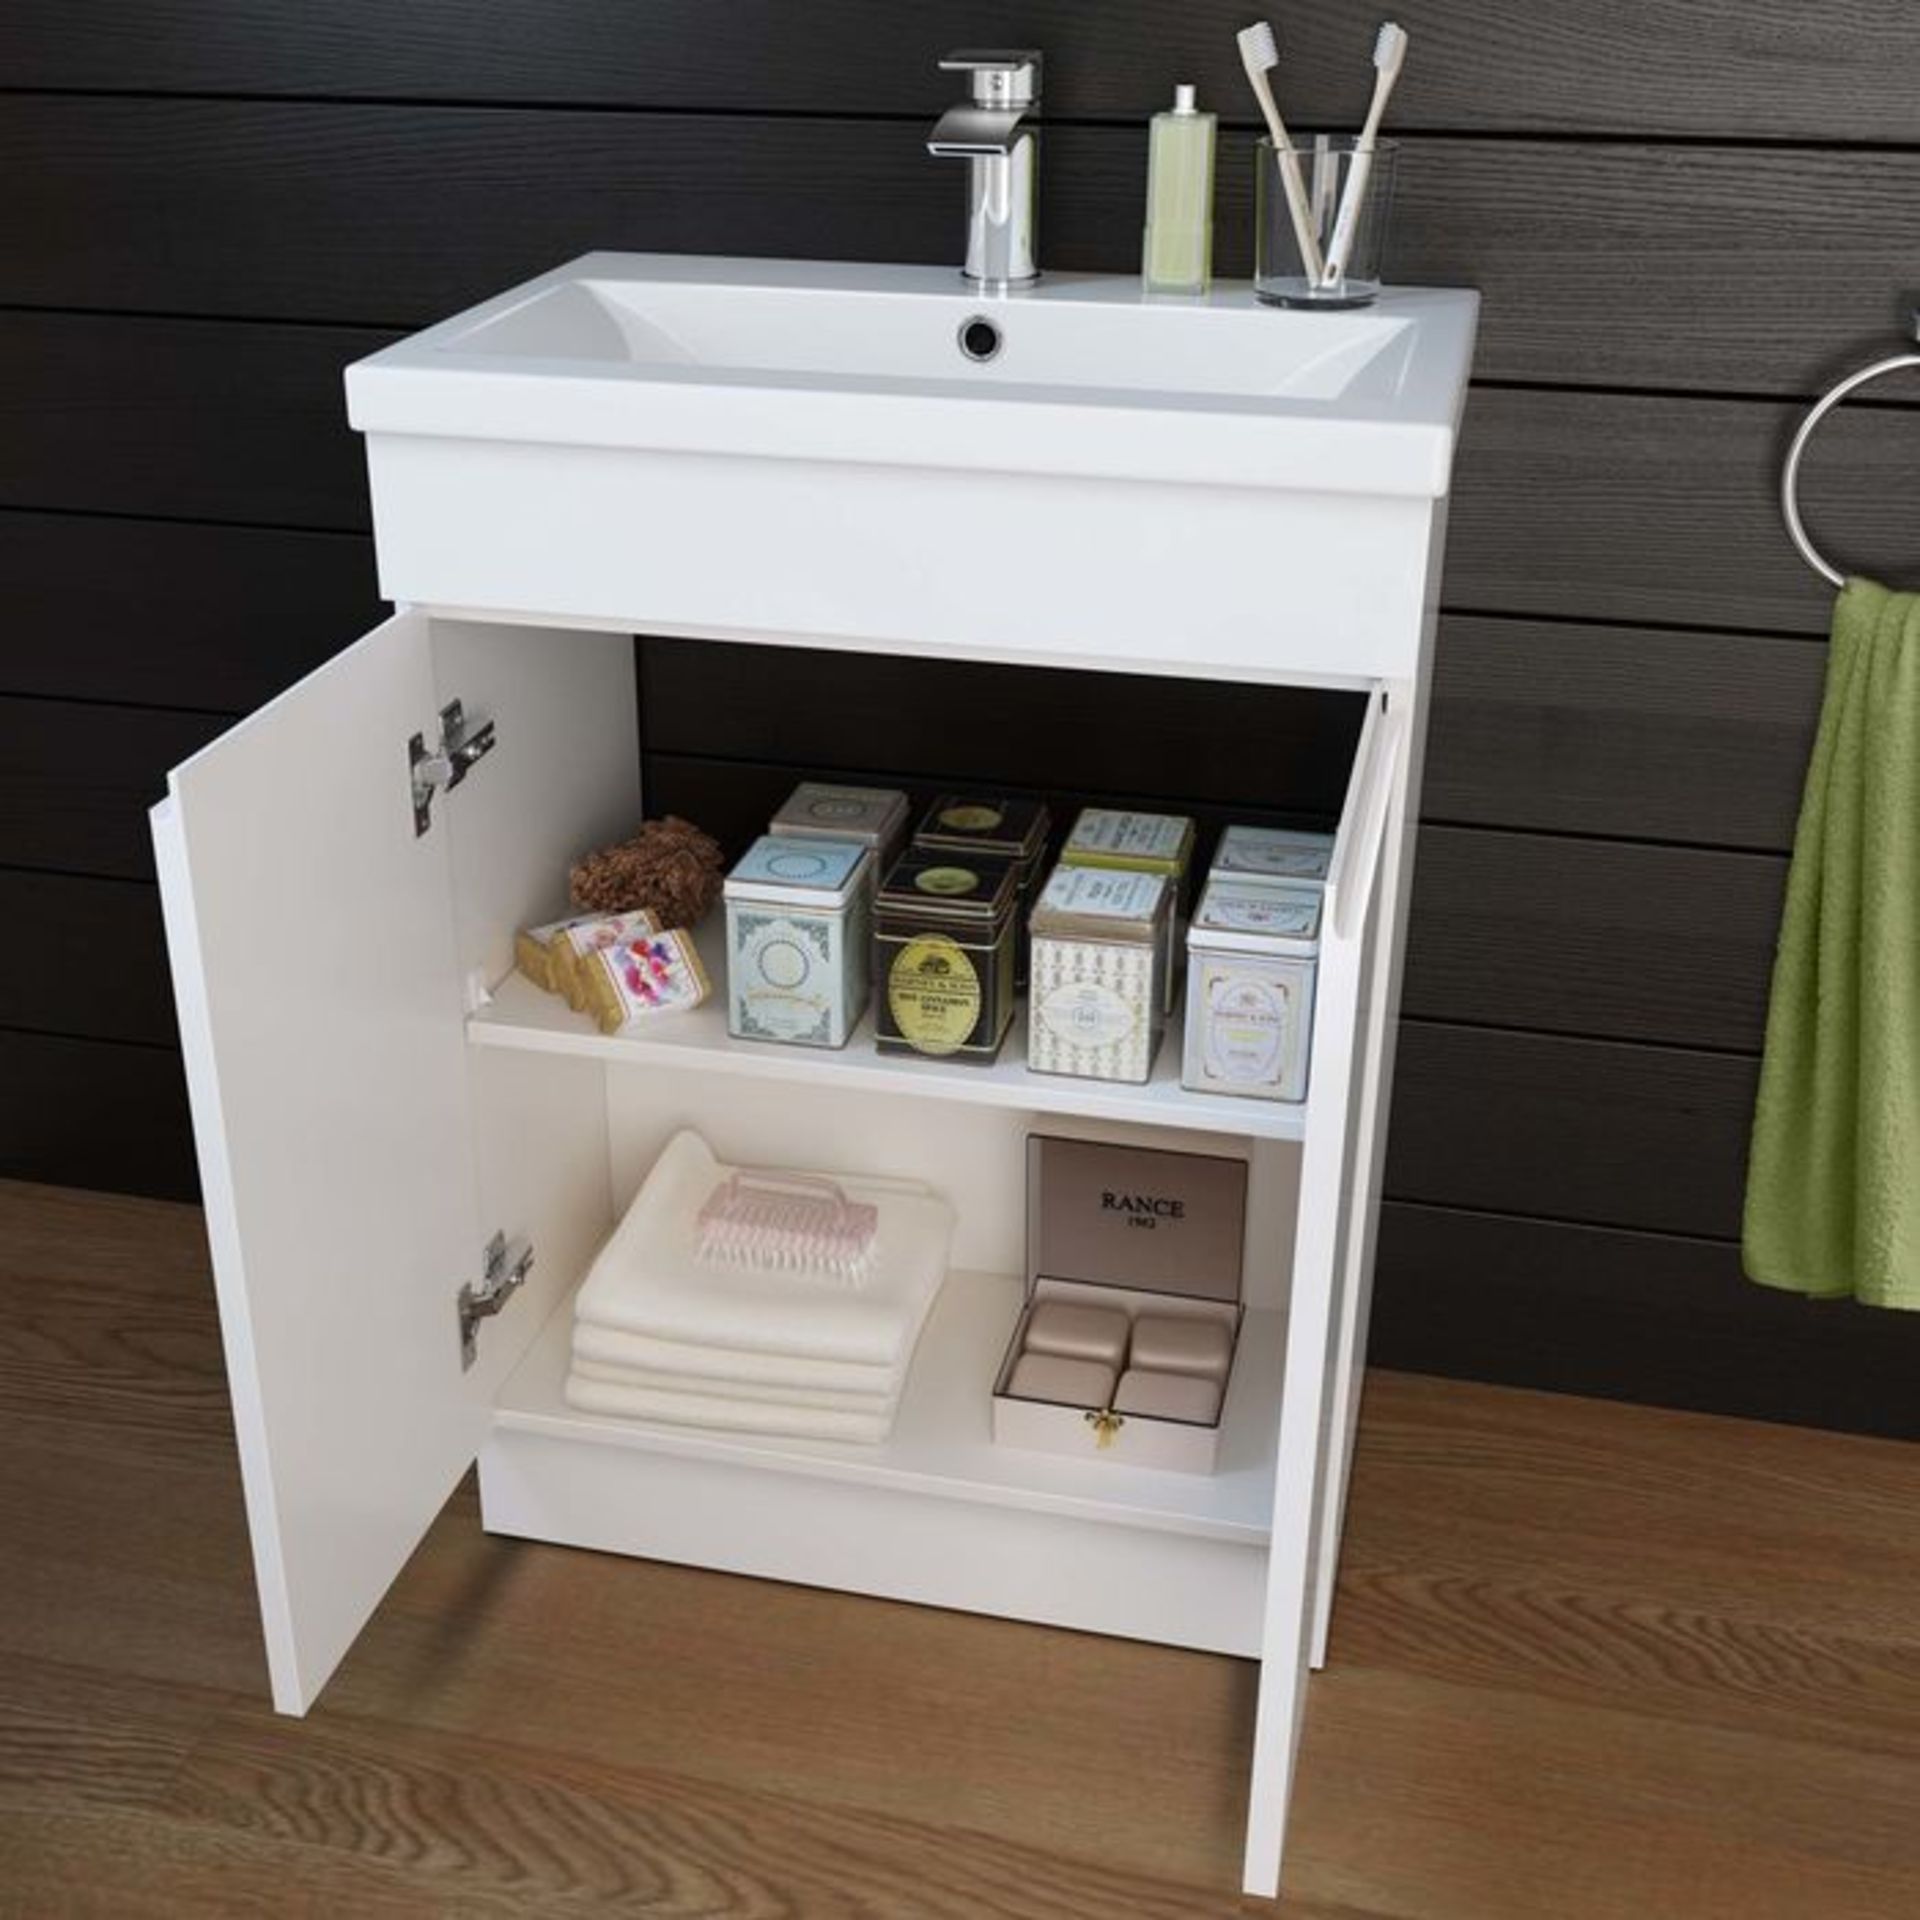 NEW BOXED 600mm Trent Gloss White Sink Cabinet - Floor Standing.RRP £499.99.Comes complete wit... - Image 3 of 4